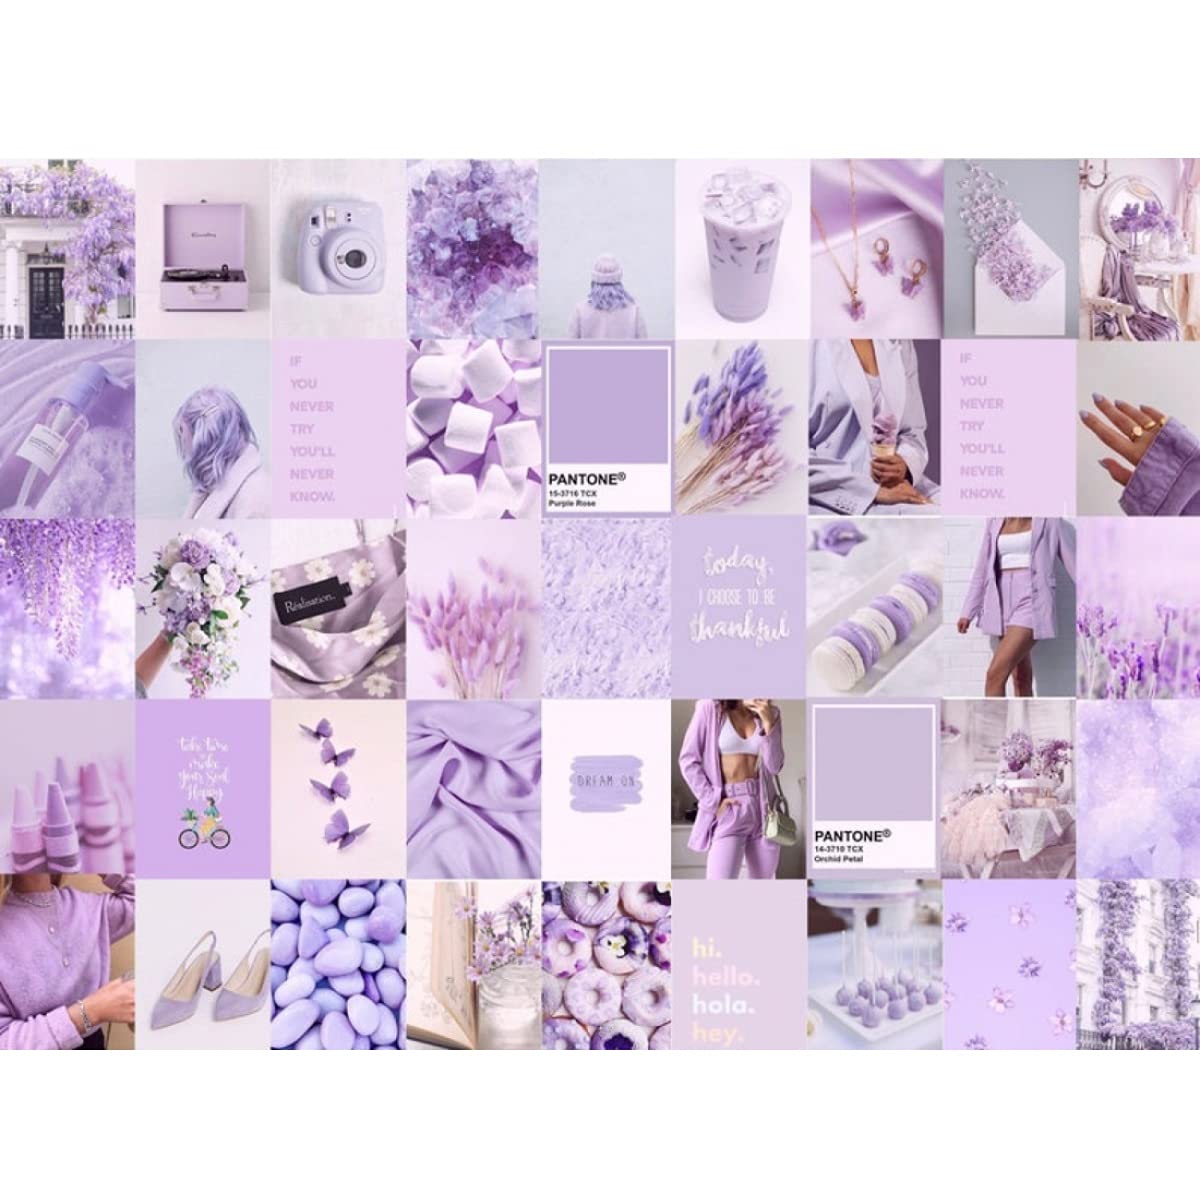 Notherss Wall Collage Kit Lavender Light Purple Aesthetic Picture Set of 60 Photo Collage Set Room Wall Decor, 4 x 6 Inch - 